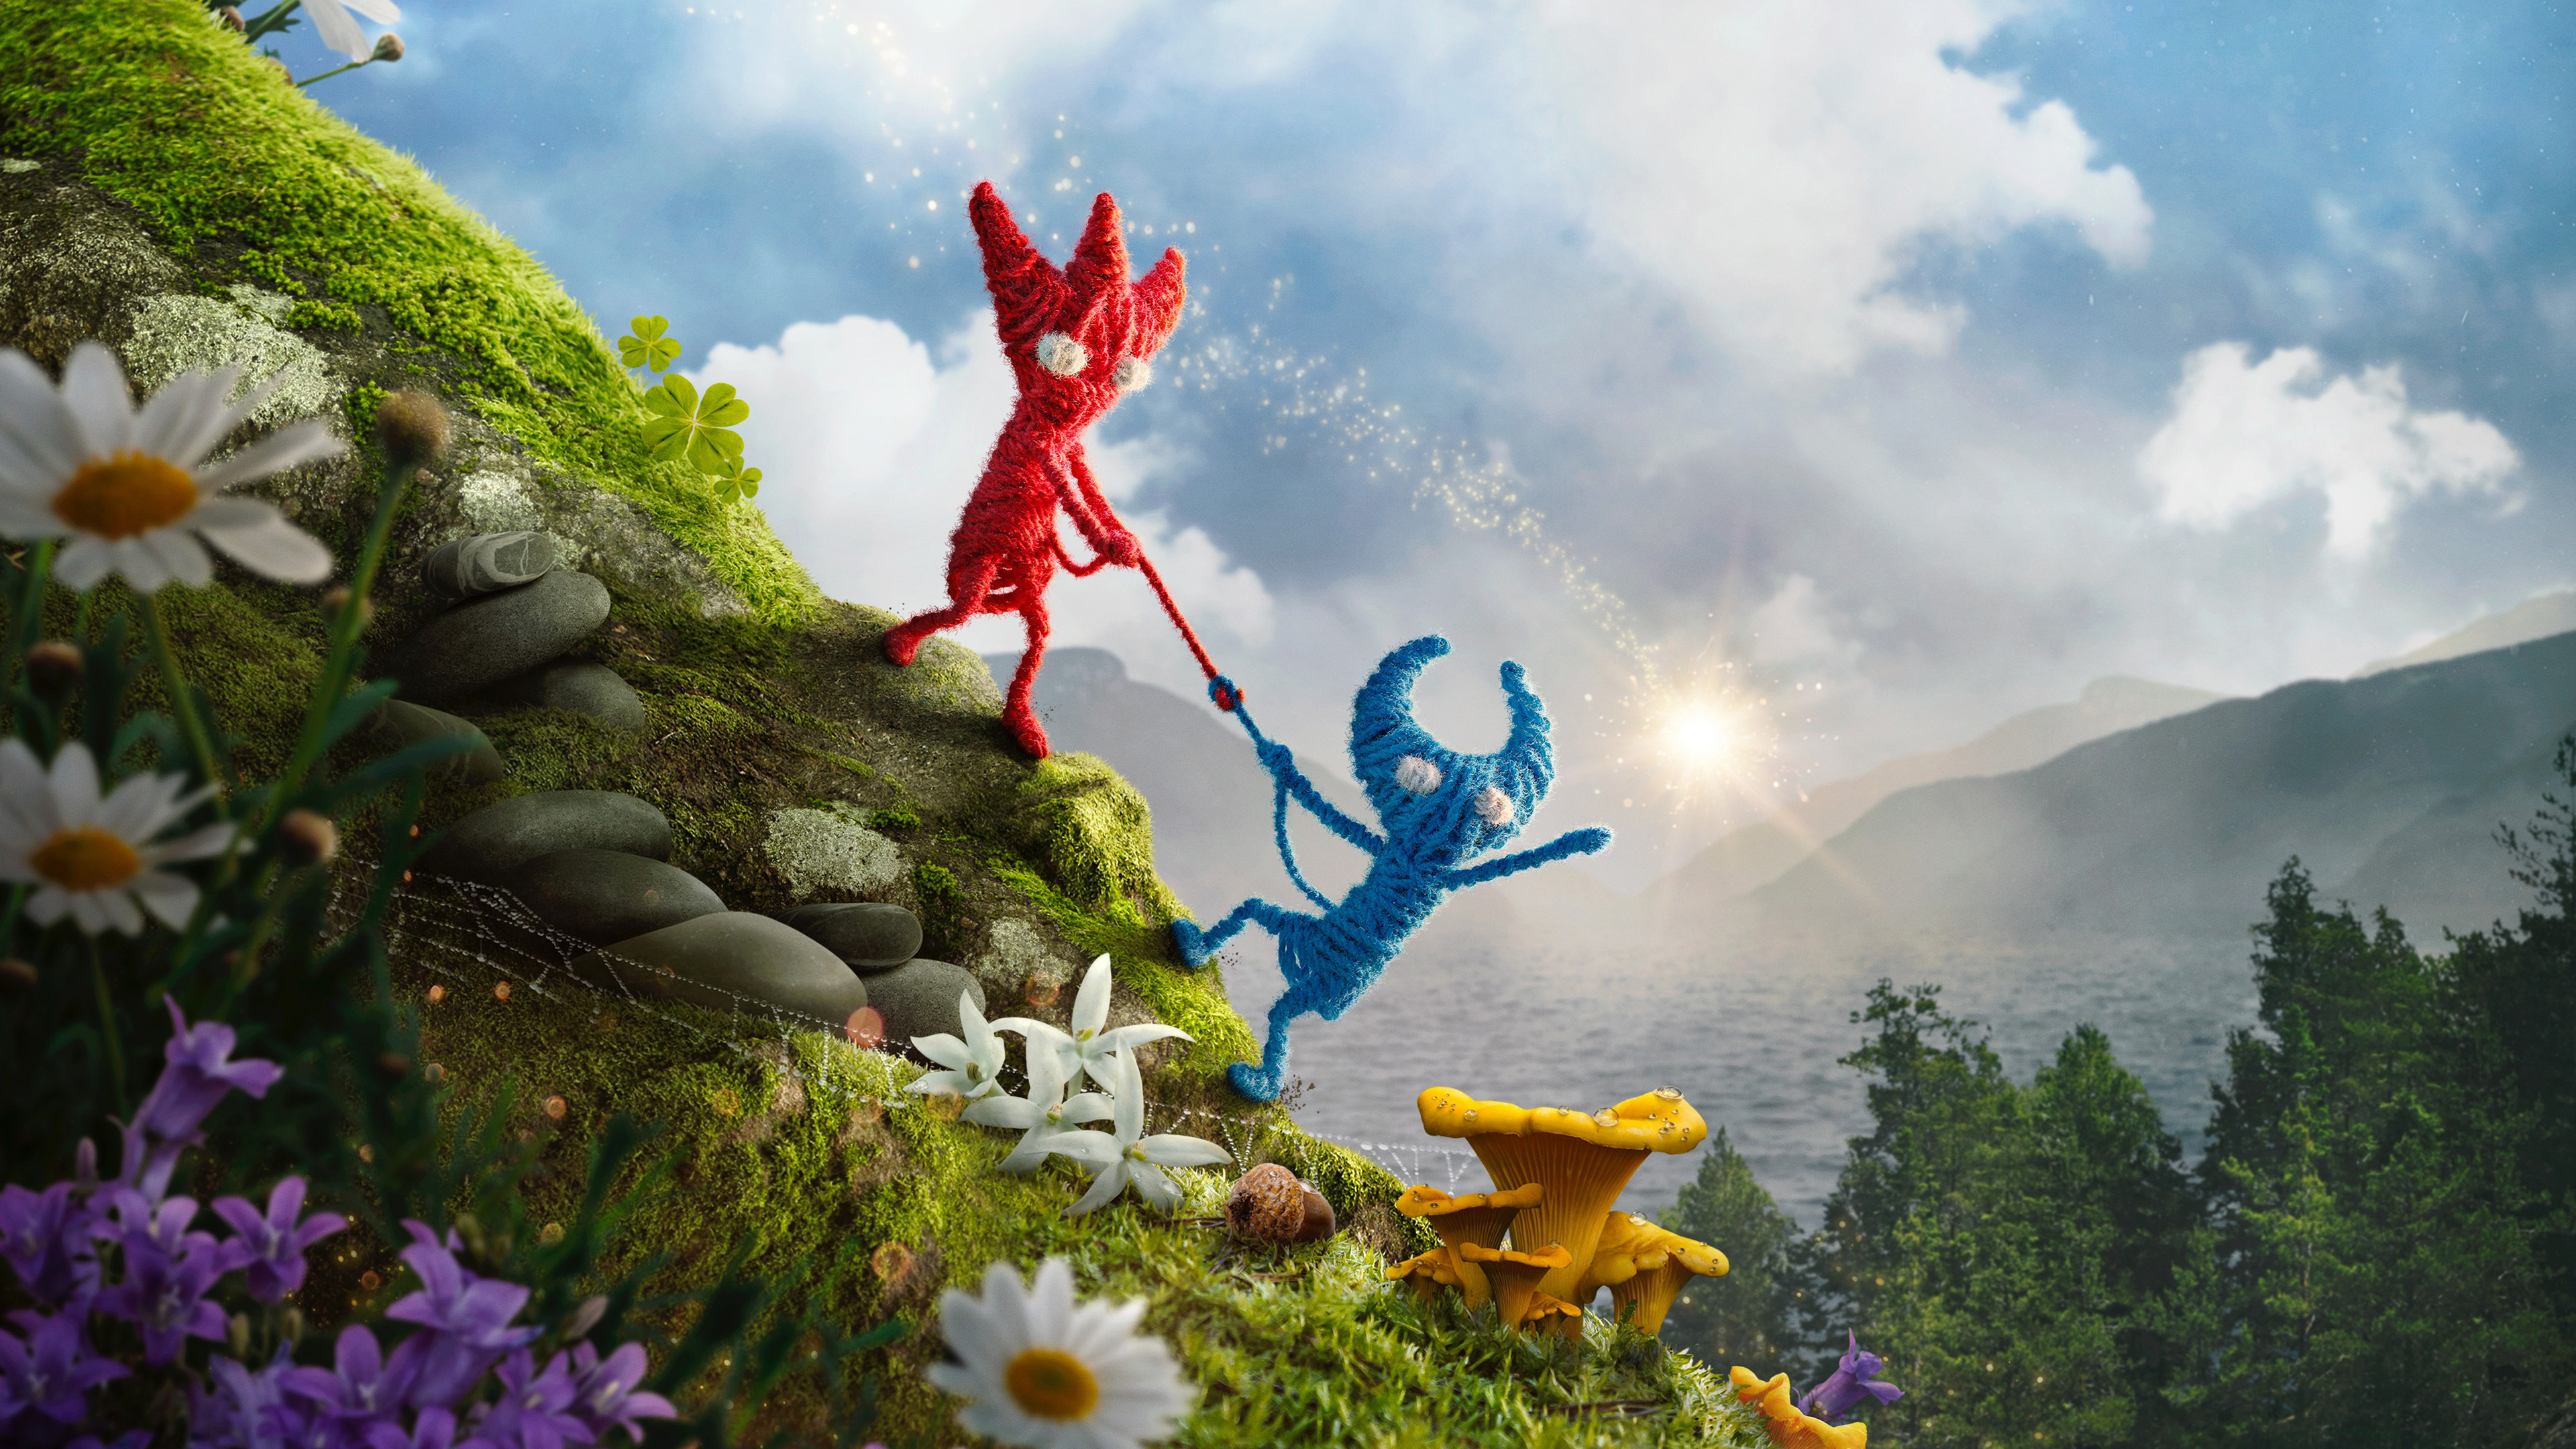 Free photo Unravel 2 video game poster for Xbox One